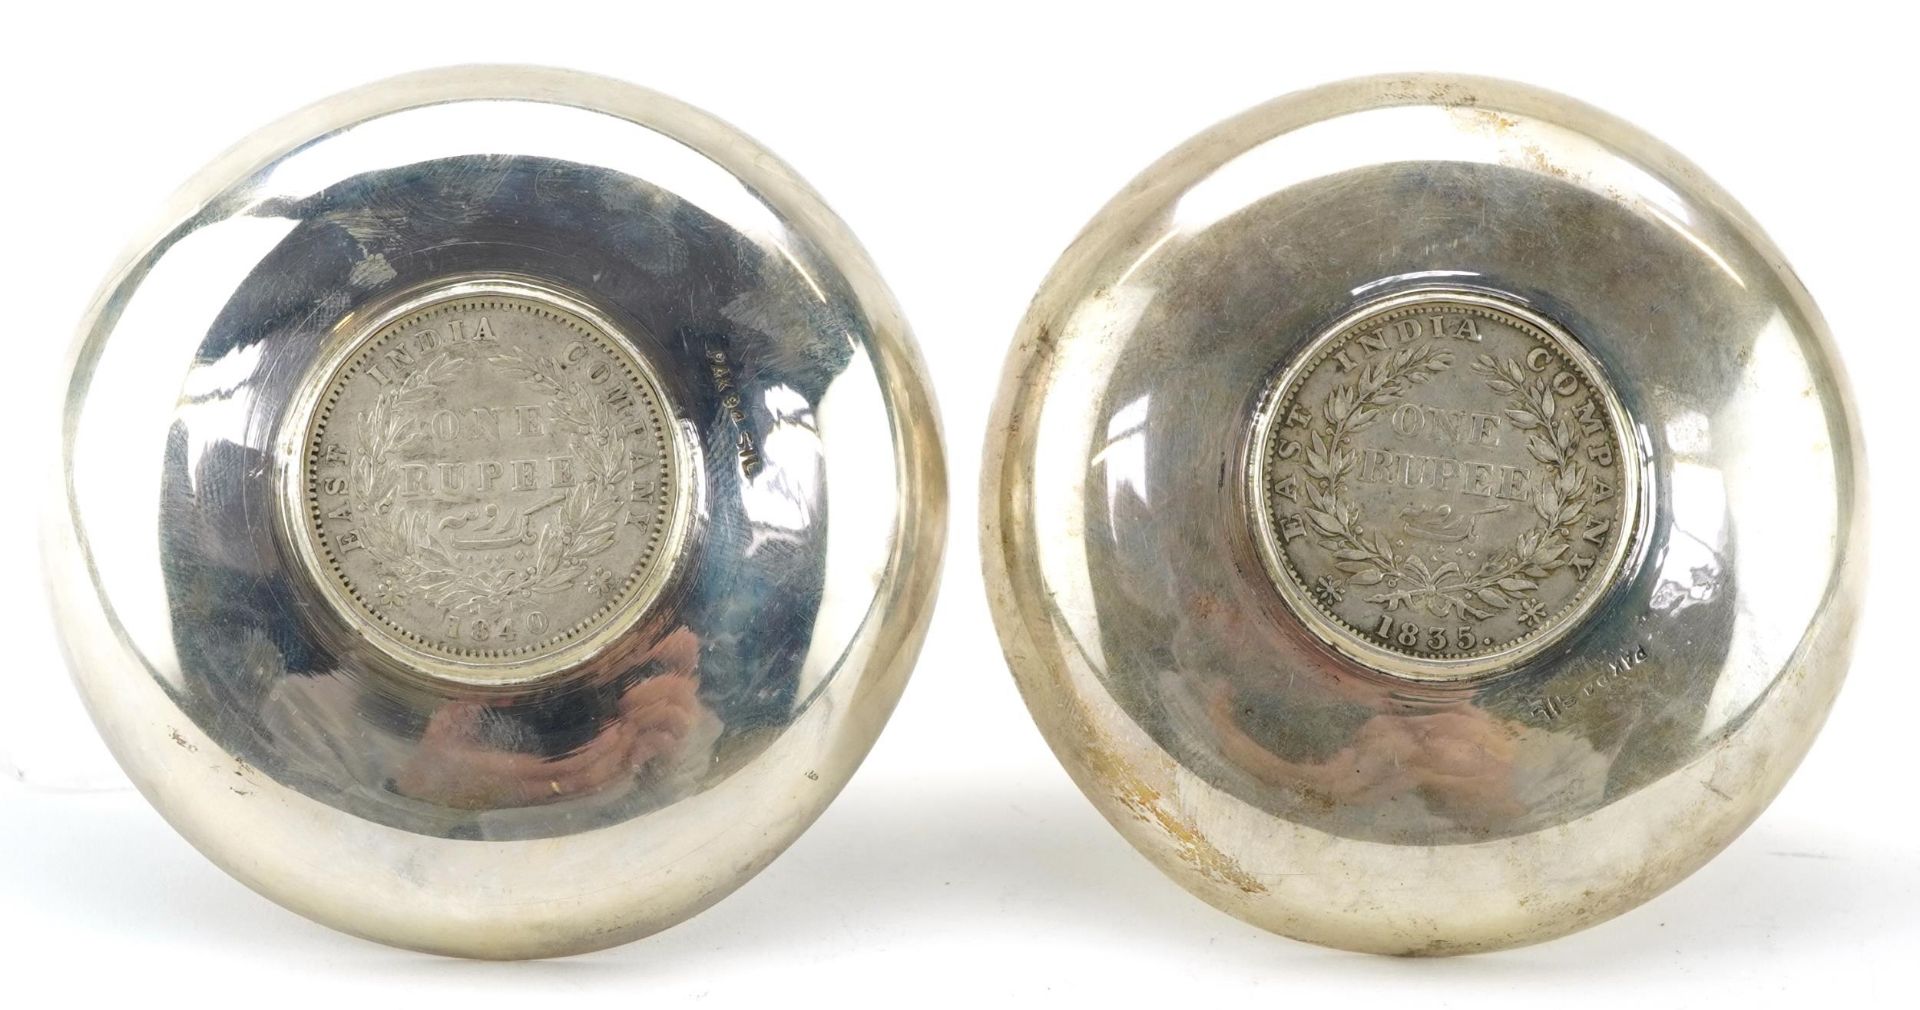 Pair of Indian circular silver 1835 and 1840 one rupee coin dishes, 8cm in diameter, 77.8g - Image 3 of 6